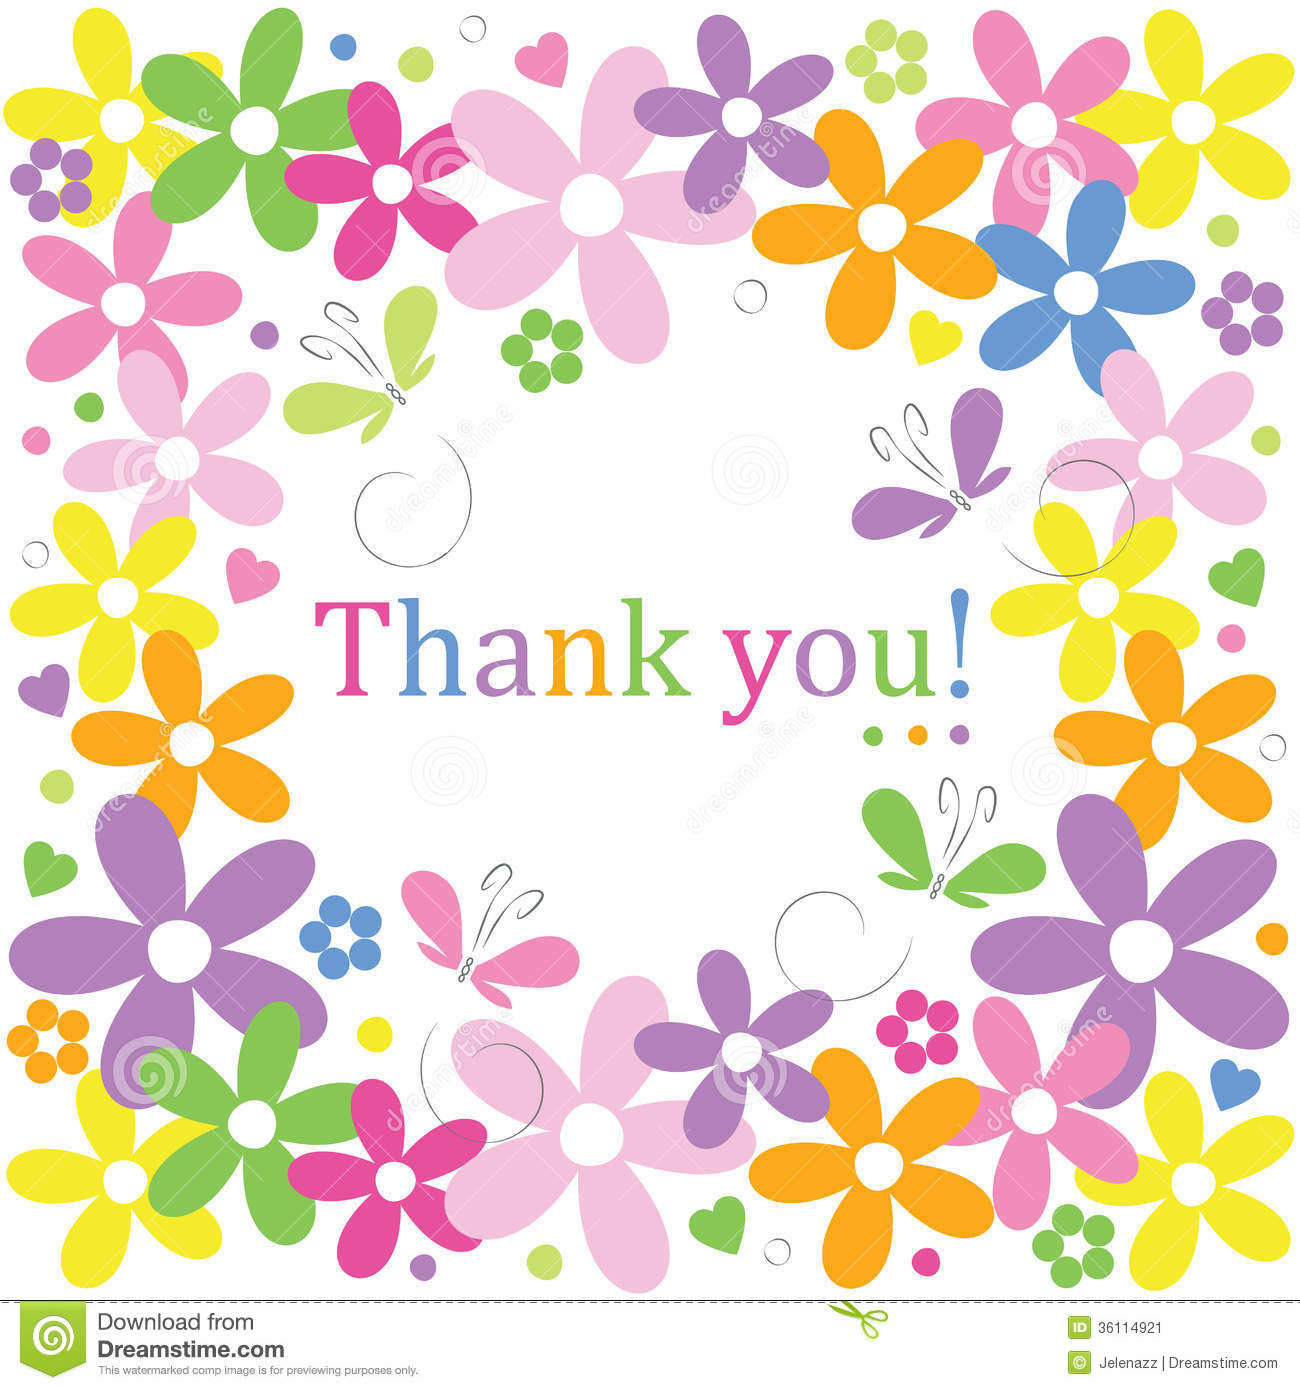 Hearts Flowers And Butterflies Thank You Card Stock Image   Image